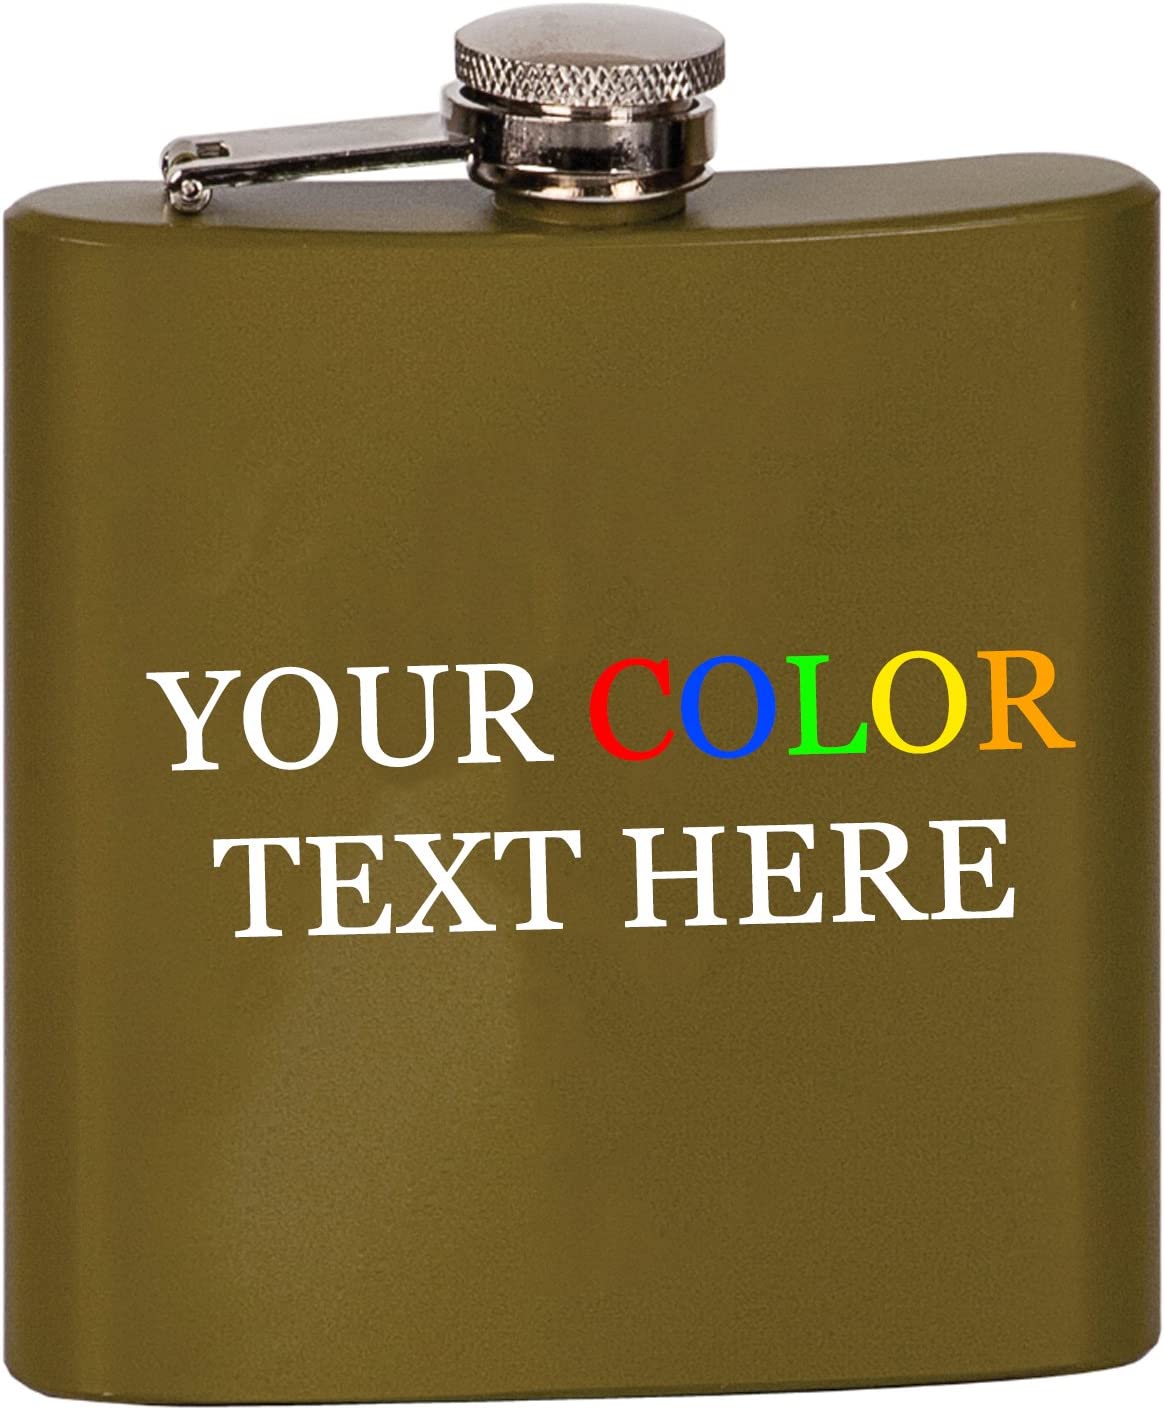 Custom Color Printed Stainless Steel 6oz Flask - Add Your Text, Logo, Photo